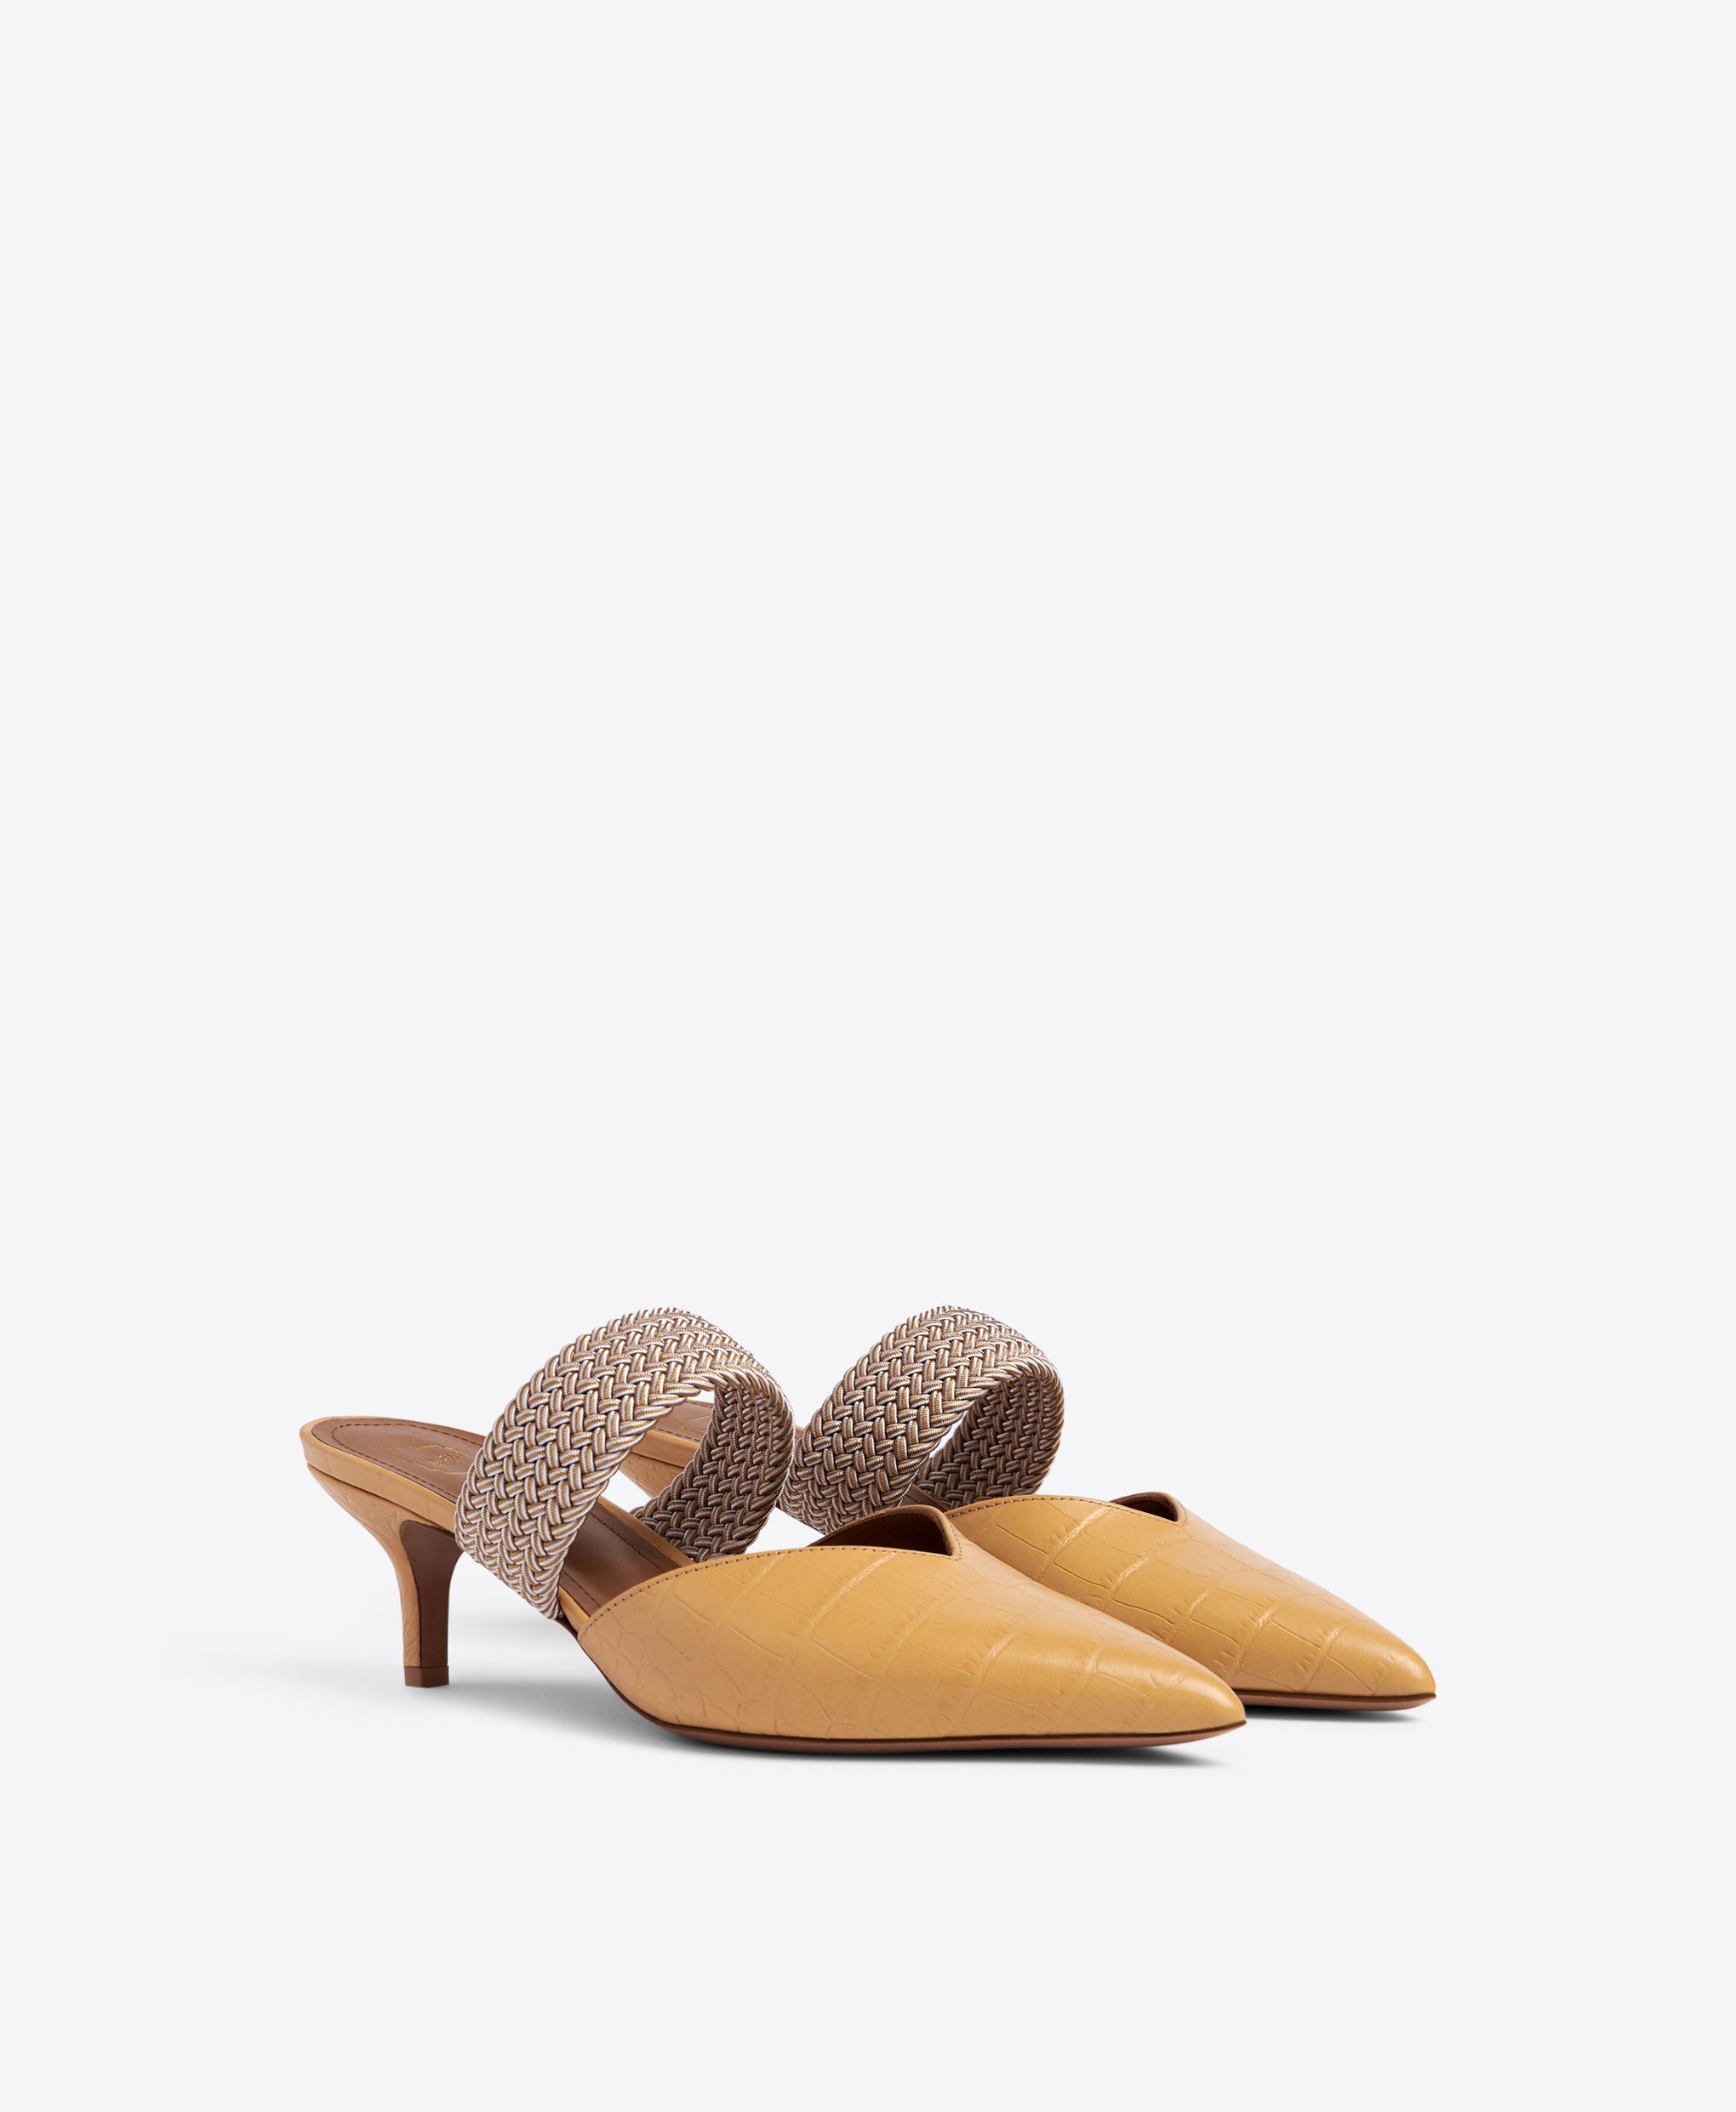 Beige Embossed Leather Stiletto Mules - Pointed Toe with Elastic Strap | Malone Souliers 